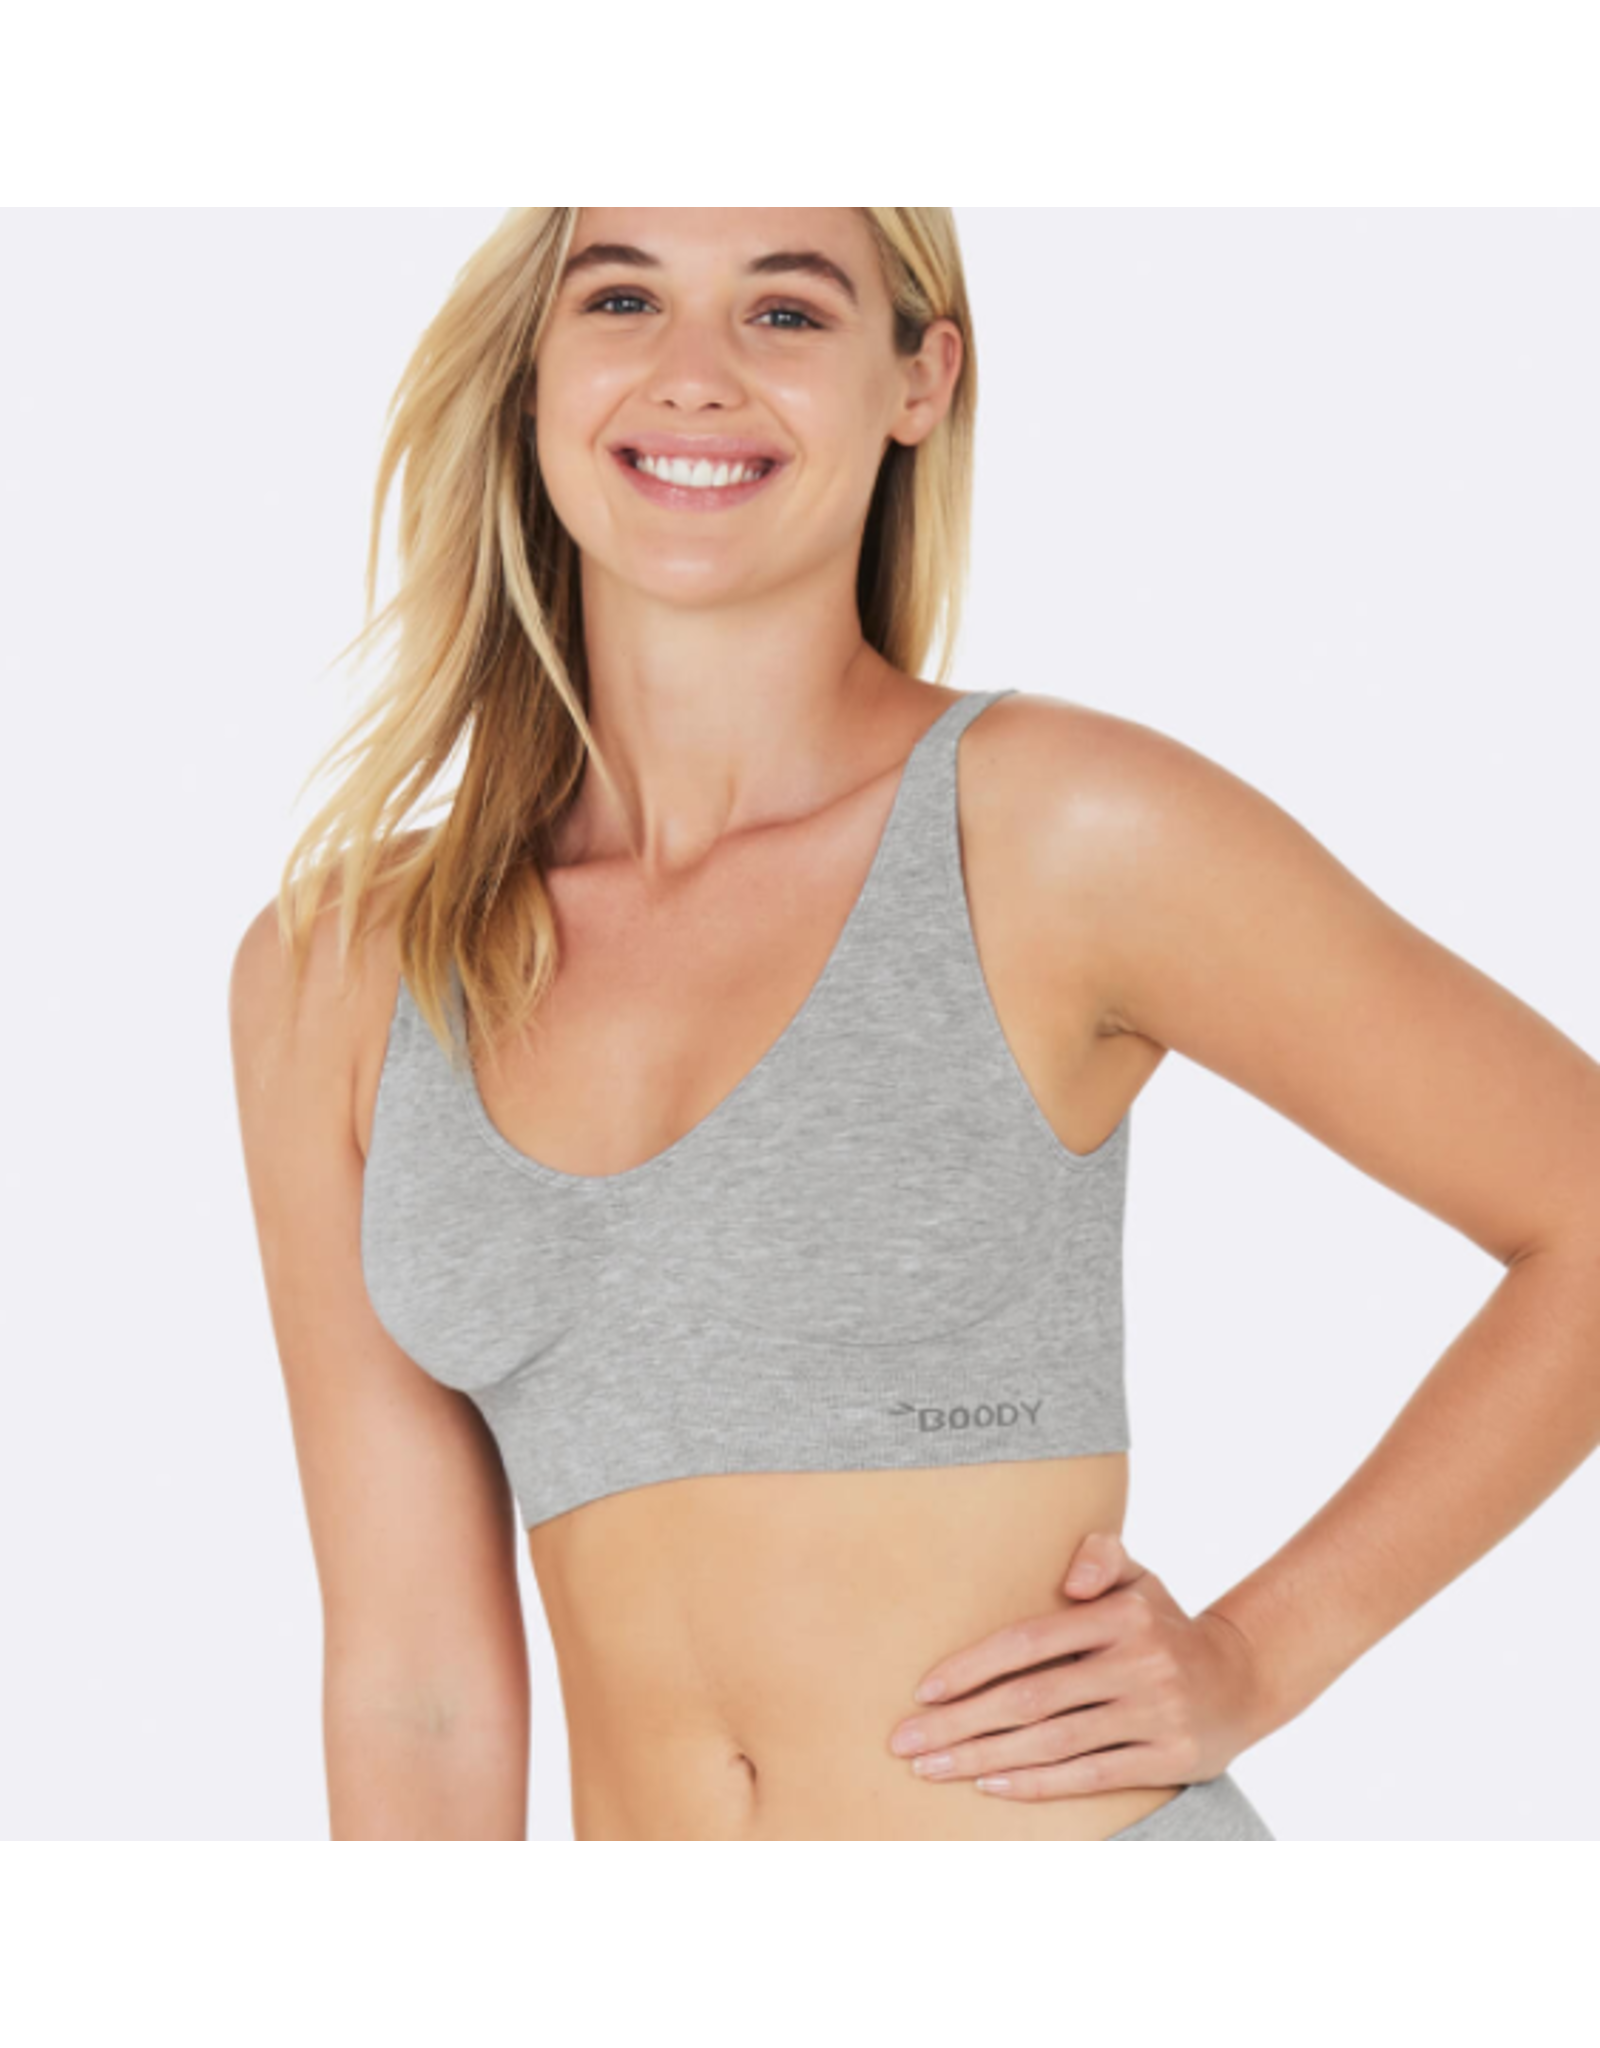 Boody Padded Shaper Crop Bra review